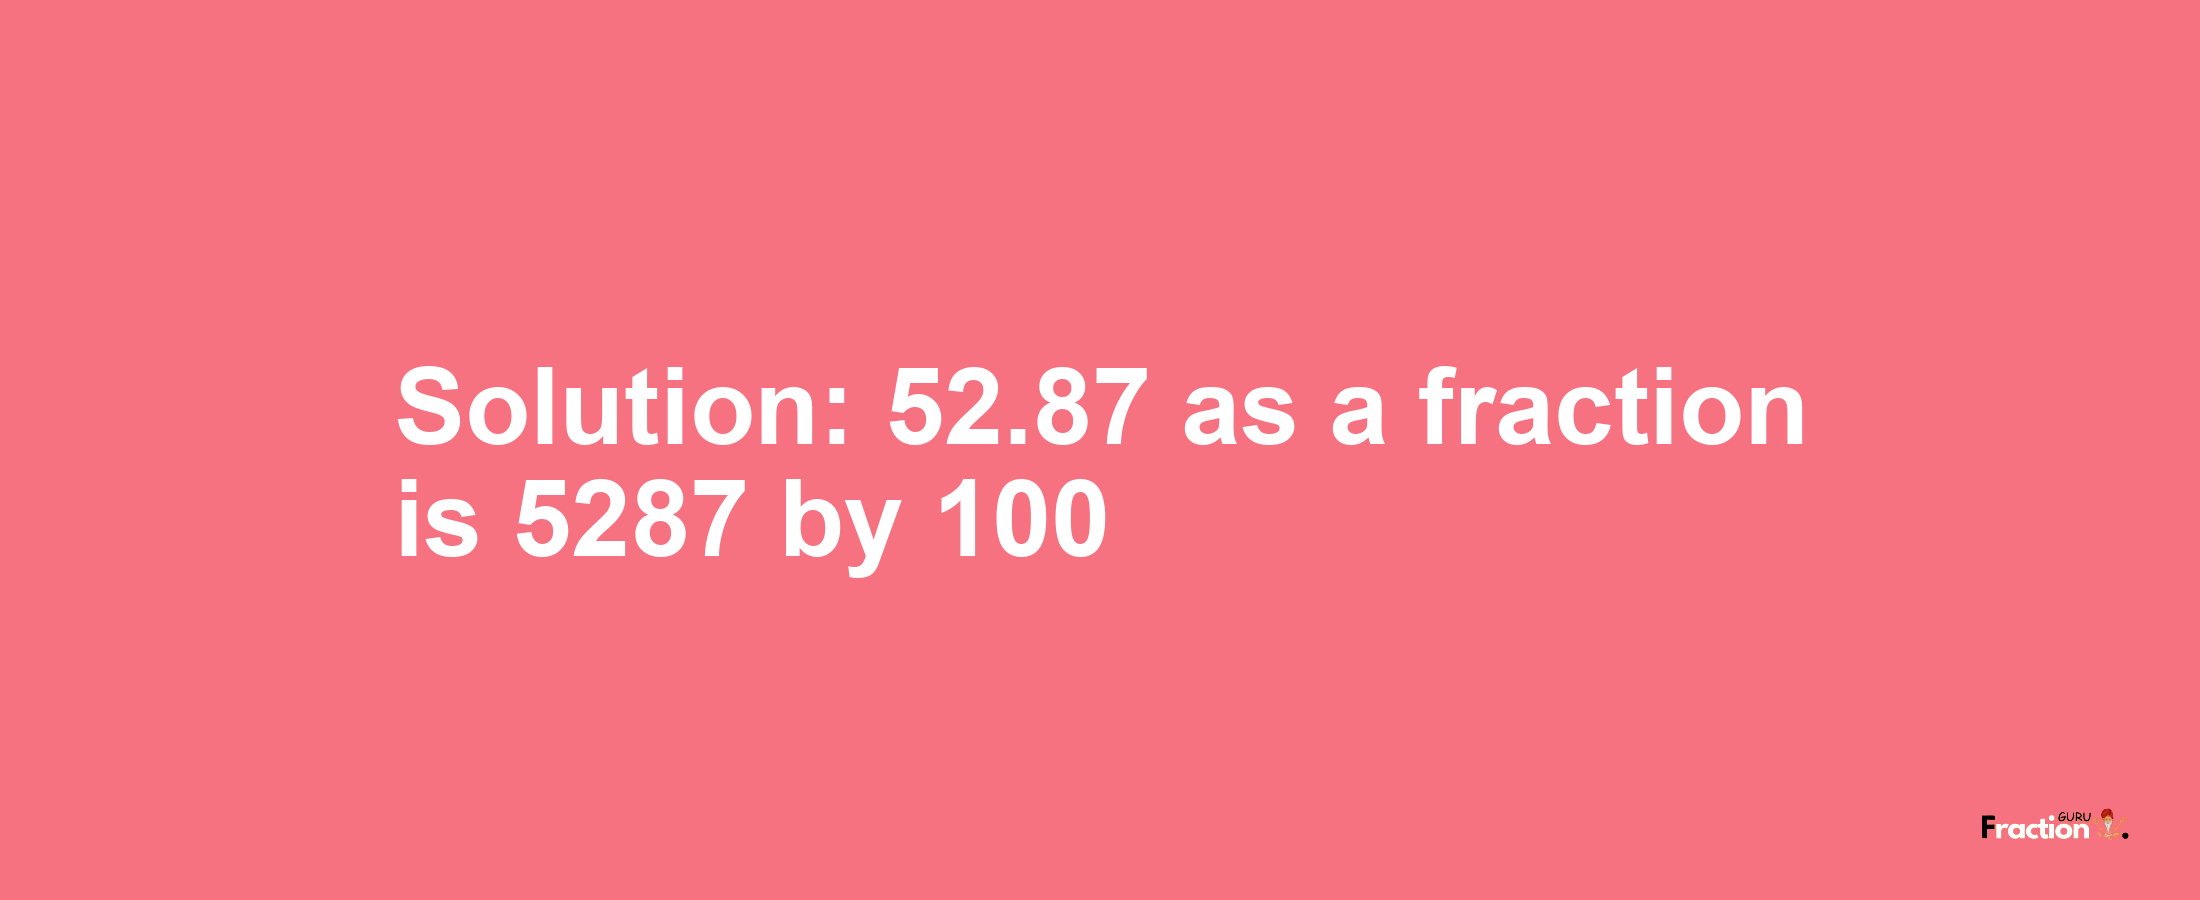 Solution:52.87 as a fraction is 5287/100